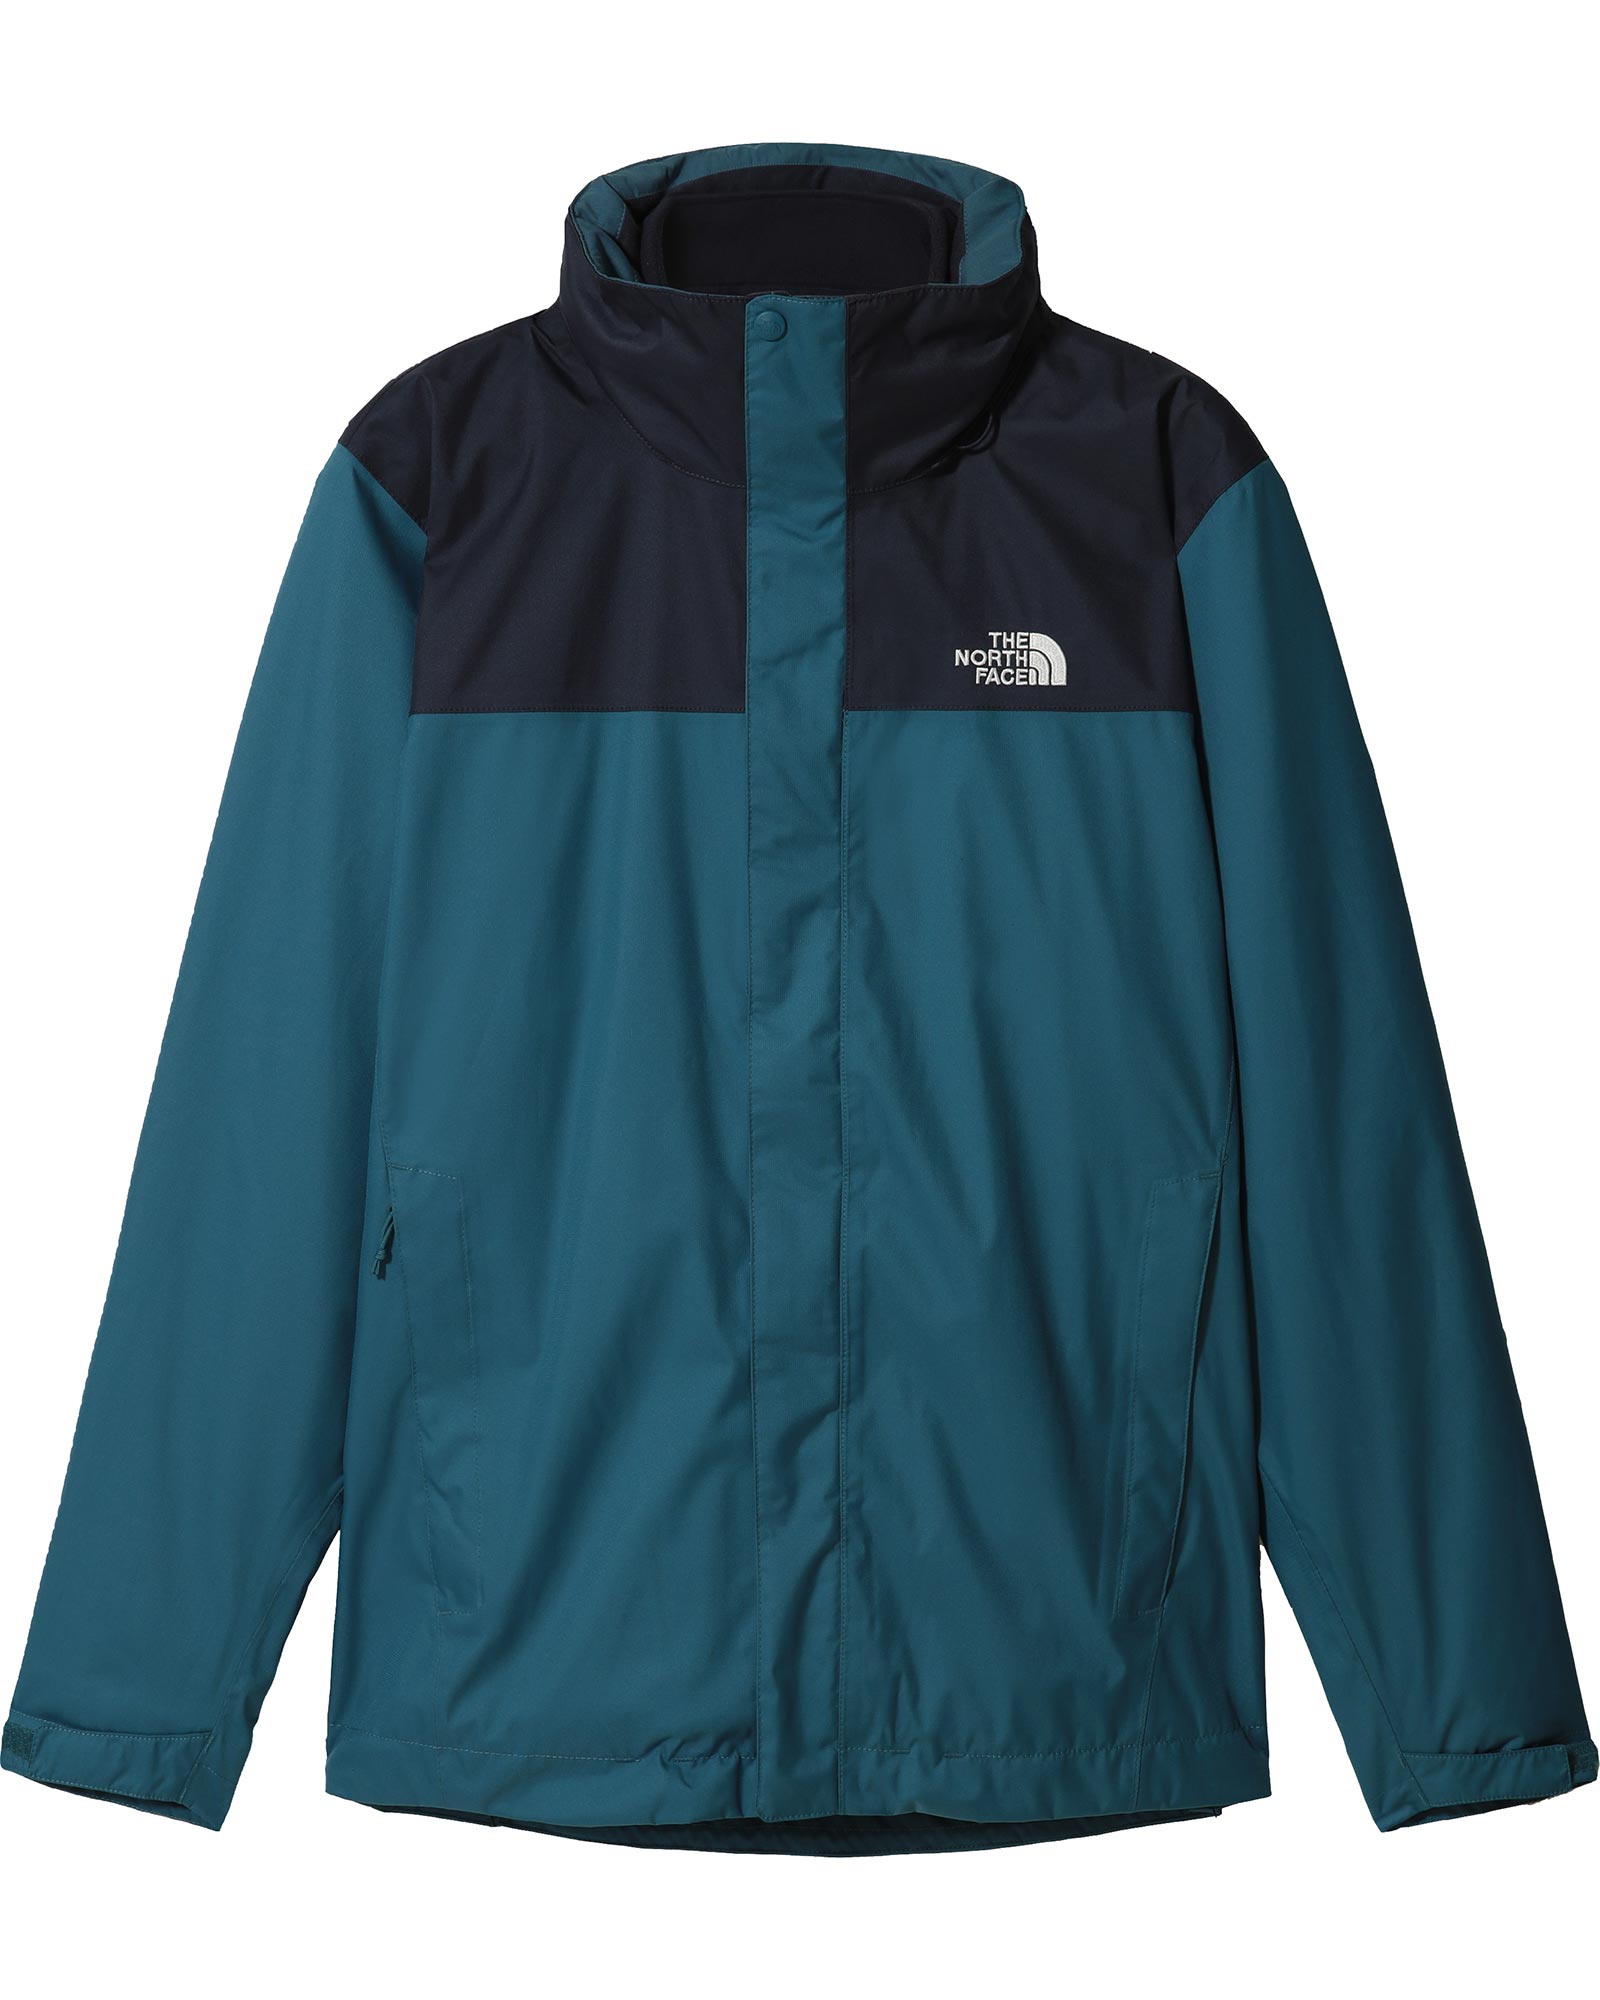 The North Face Stratos Dryvent Womens Jacket